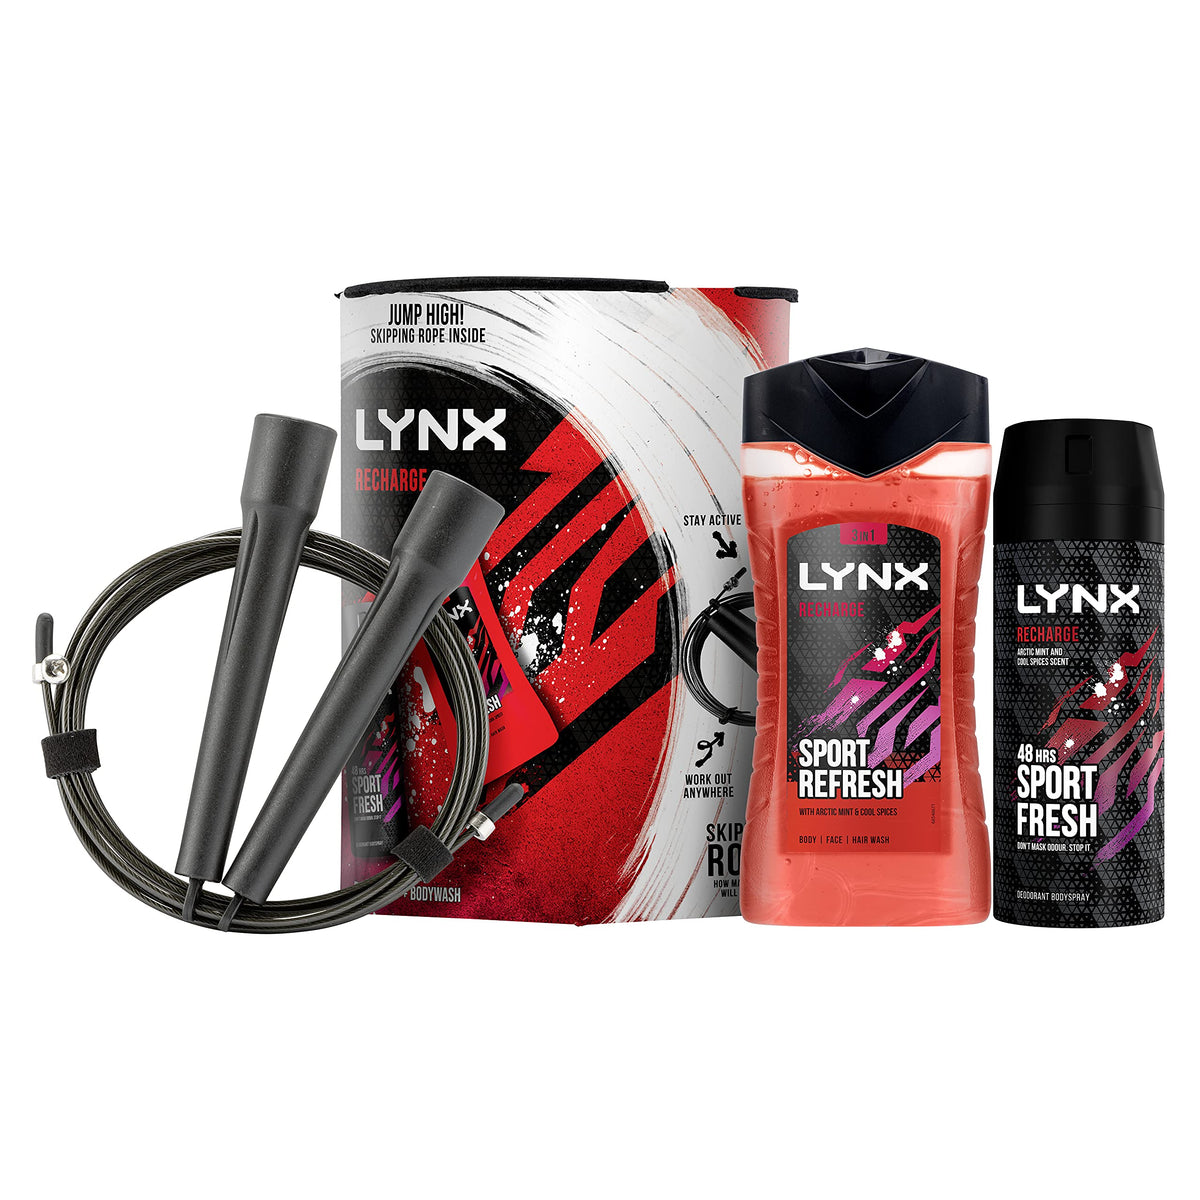 Lynx Recharge Sport Fresh Duo - Shower Gel and Body Spray with Gym Skipping Rope Set for Men 3 Piece